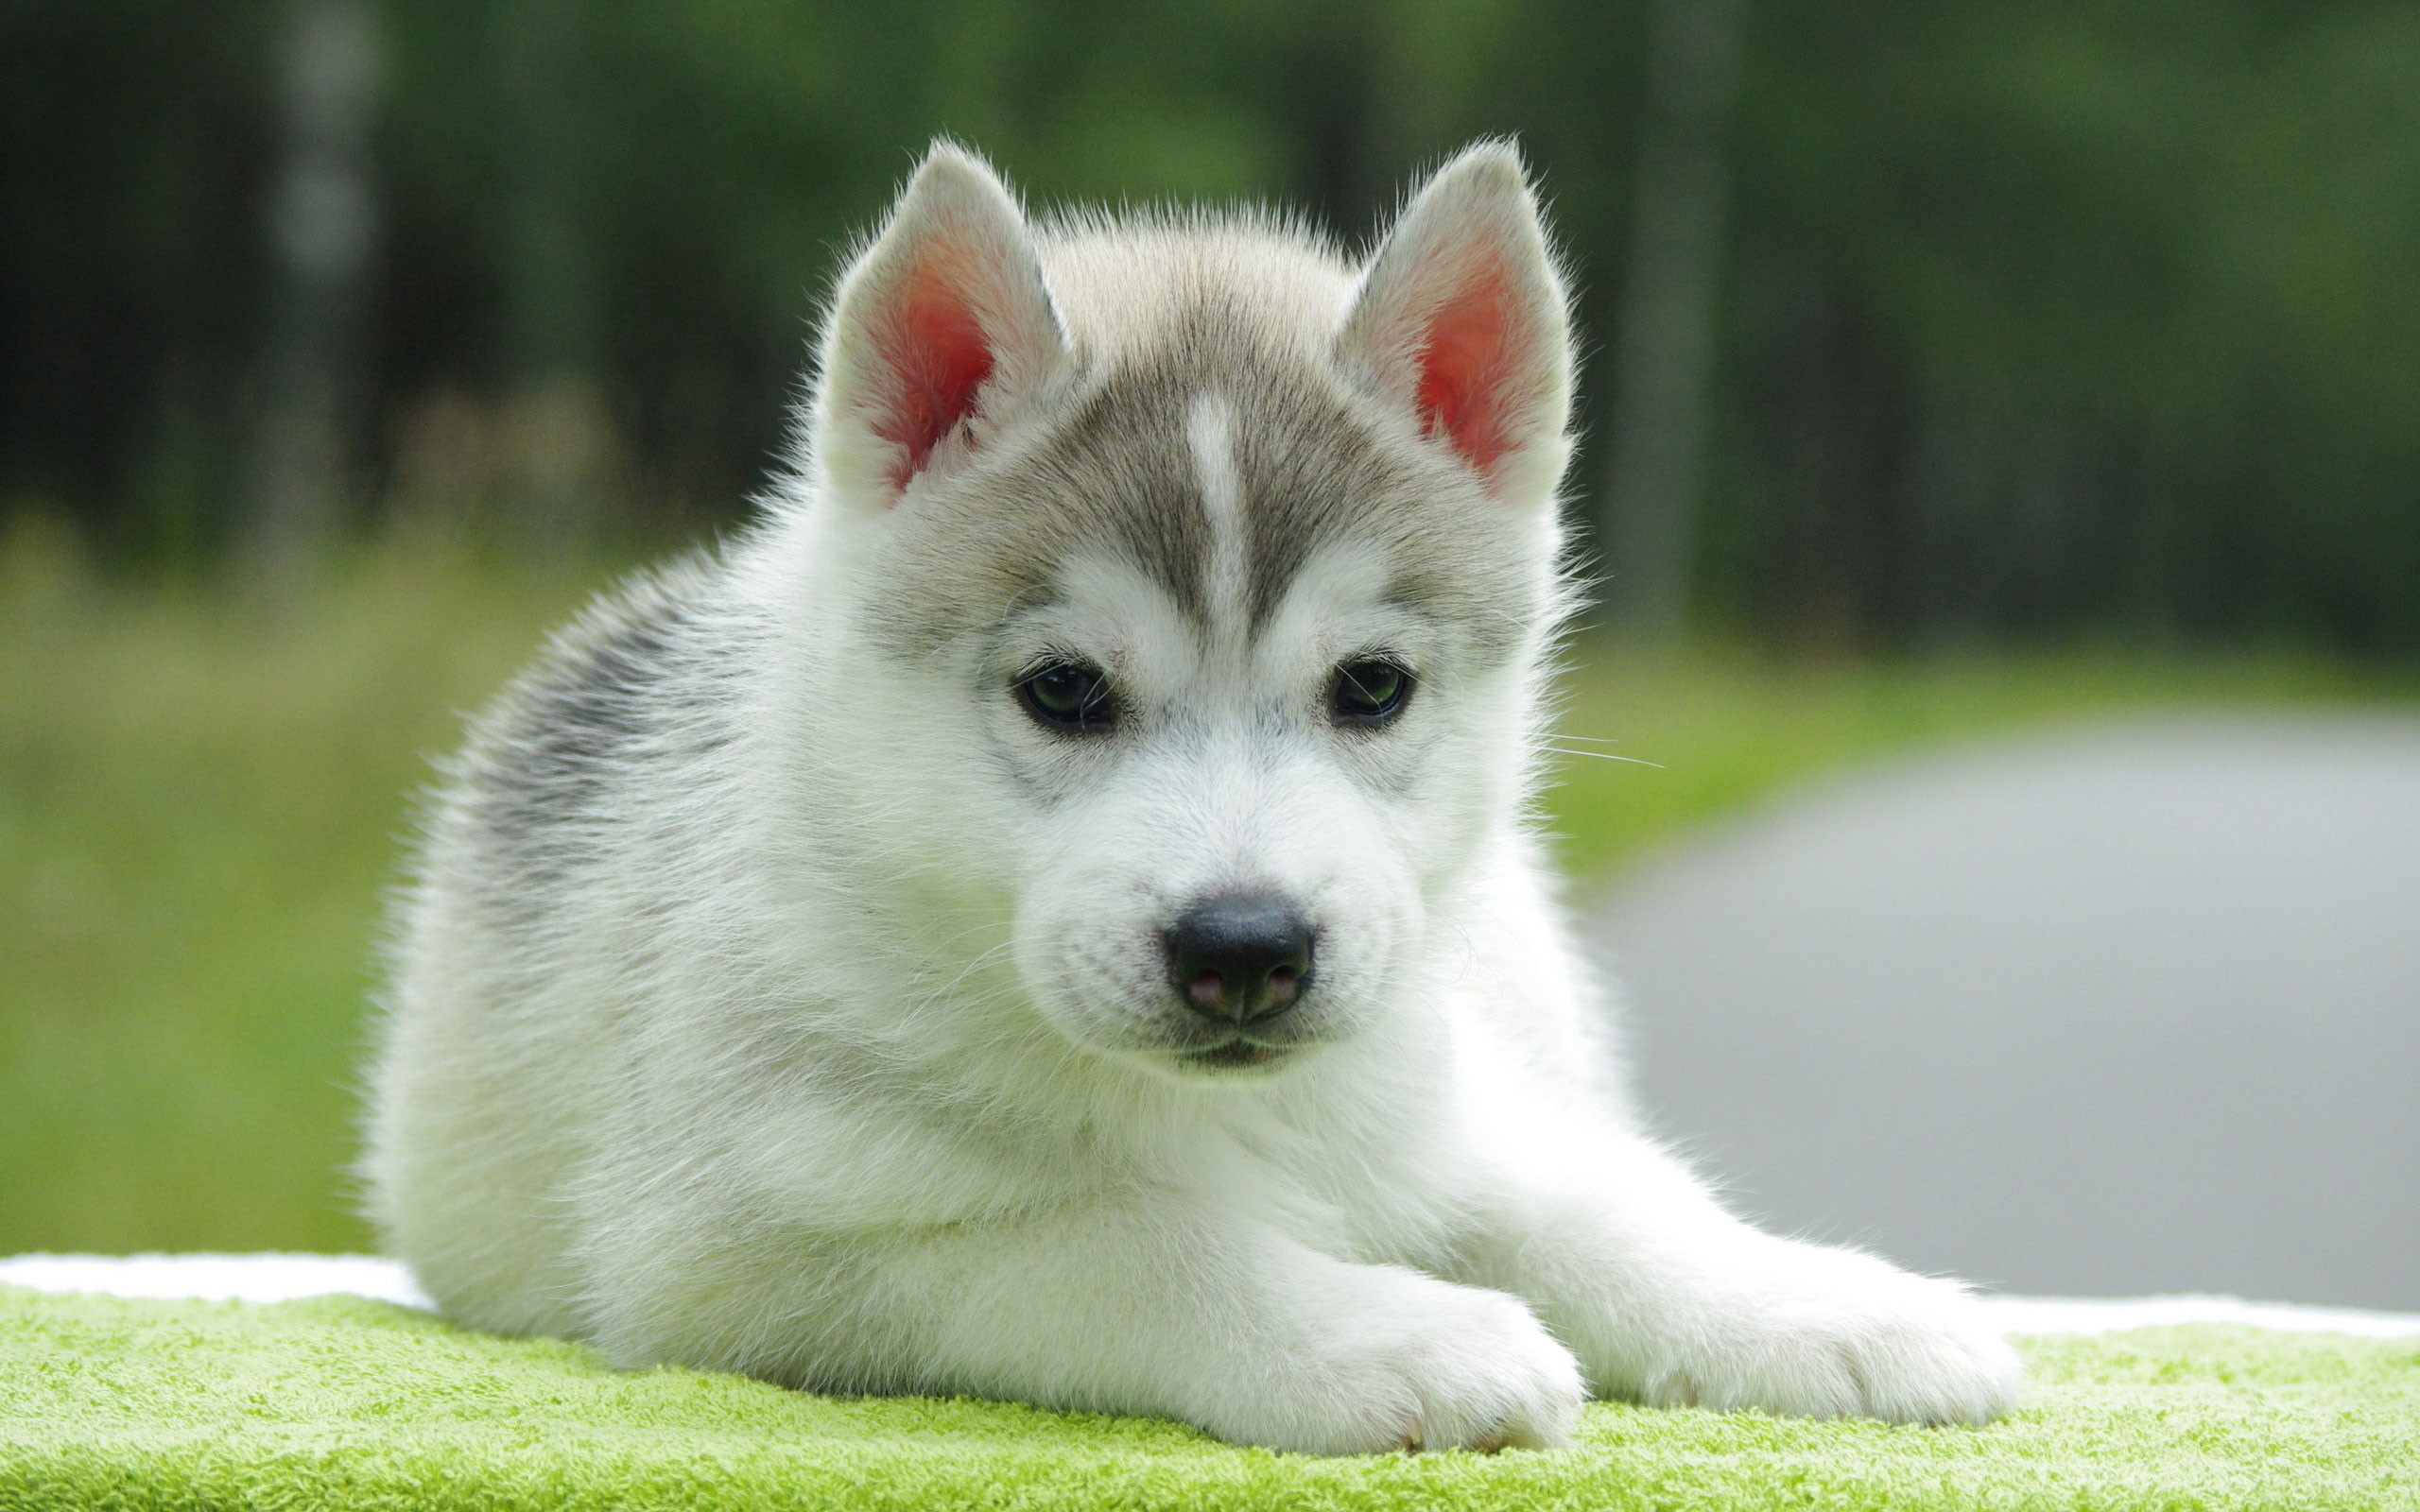 Puppy Wallpapers and Screensavers (42+ images)